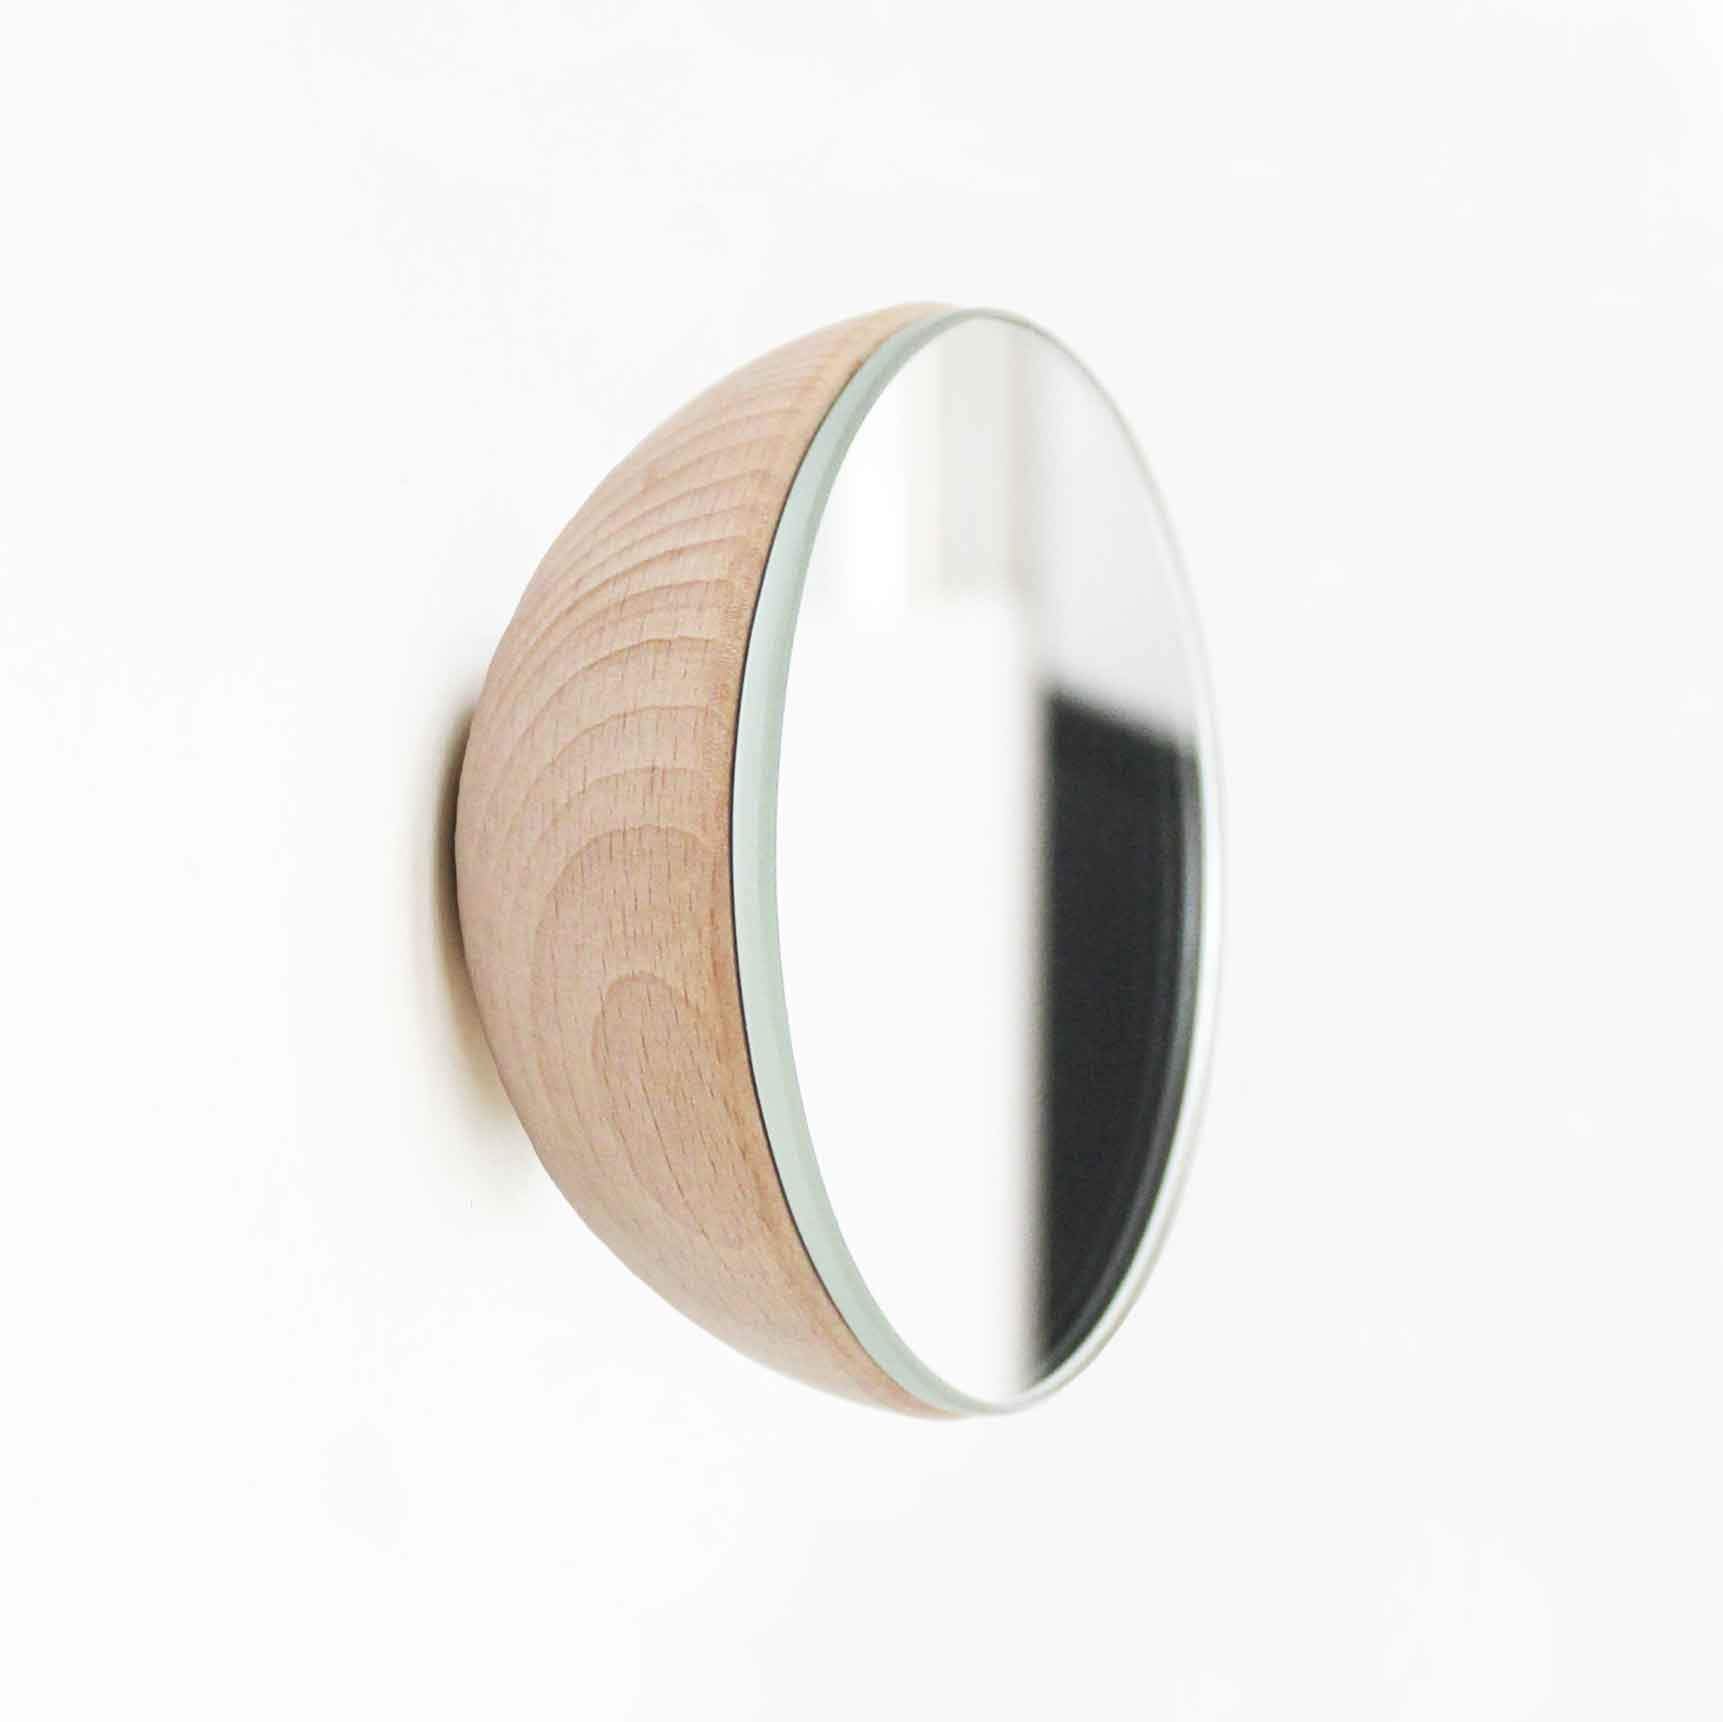 Buy Round Beech Wood Wall Mounted Mirror Coat Hook by Violet Eurynome